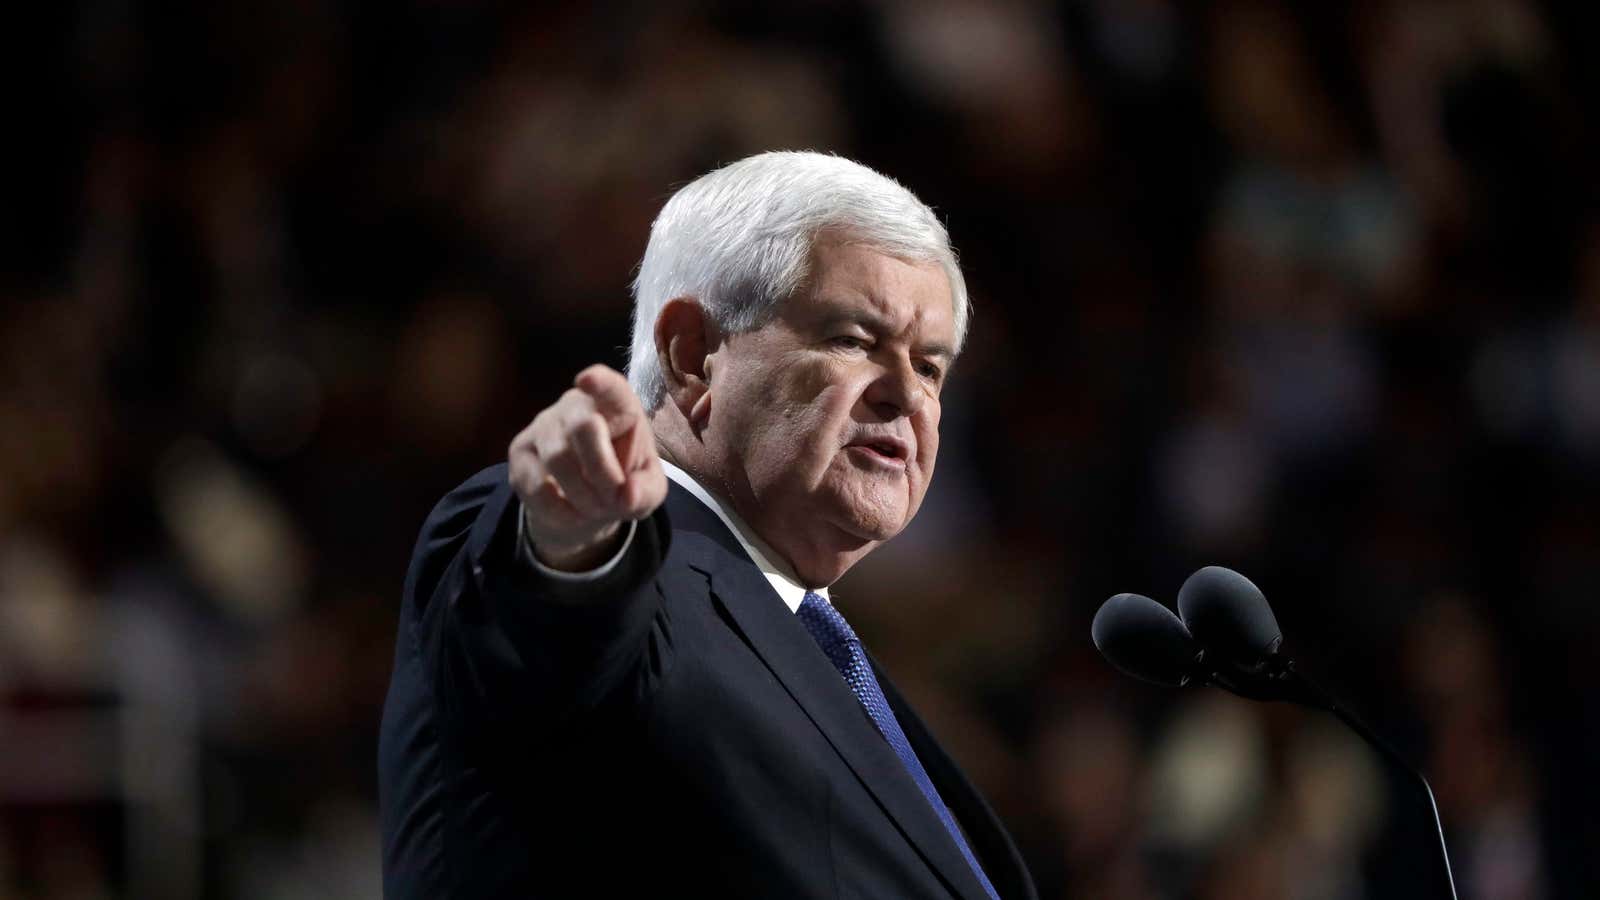 Trump is being “very self-destructive” to his campaign, Gingrich says.